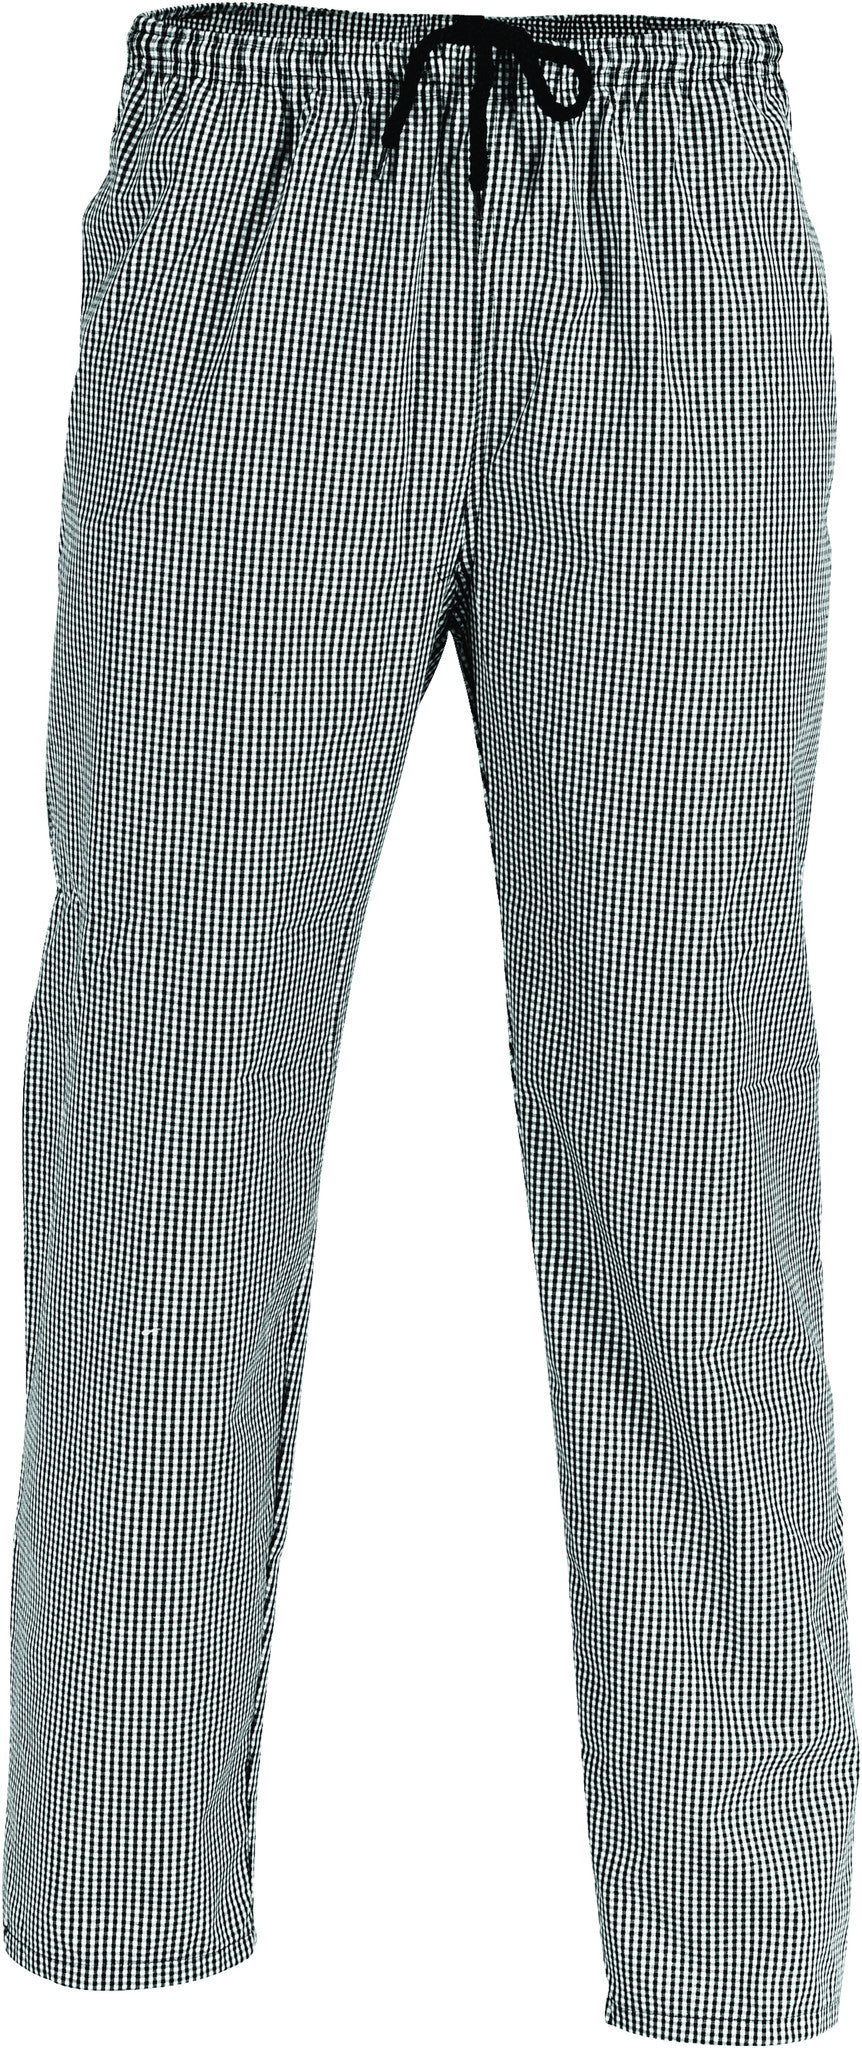 1501 - Polyester Cotton Drawstring Chef Pants - Online Workwear